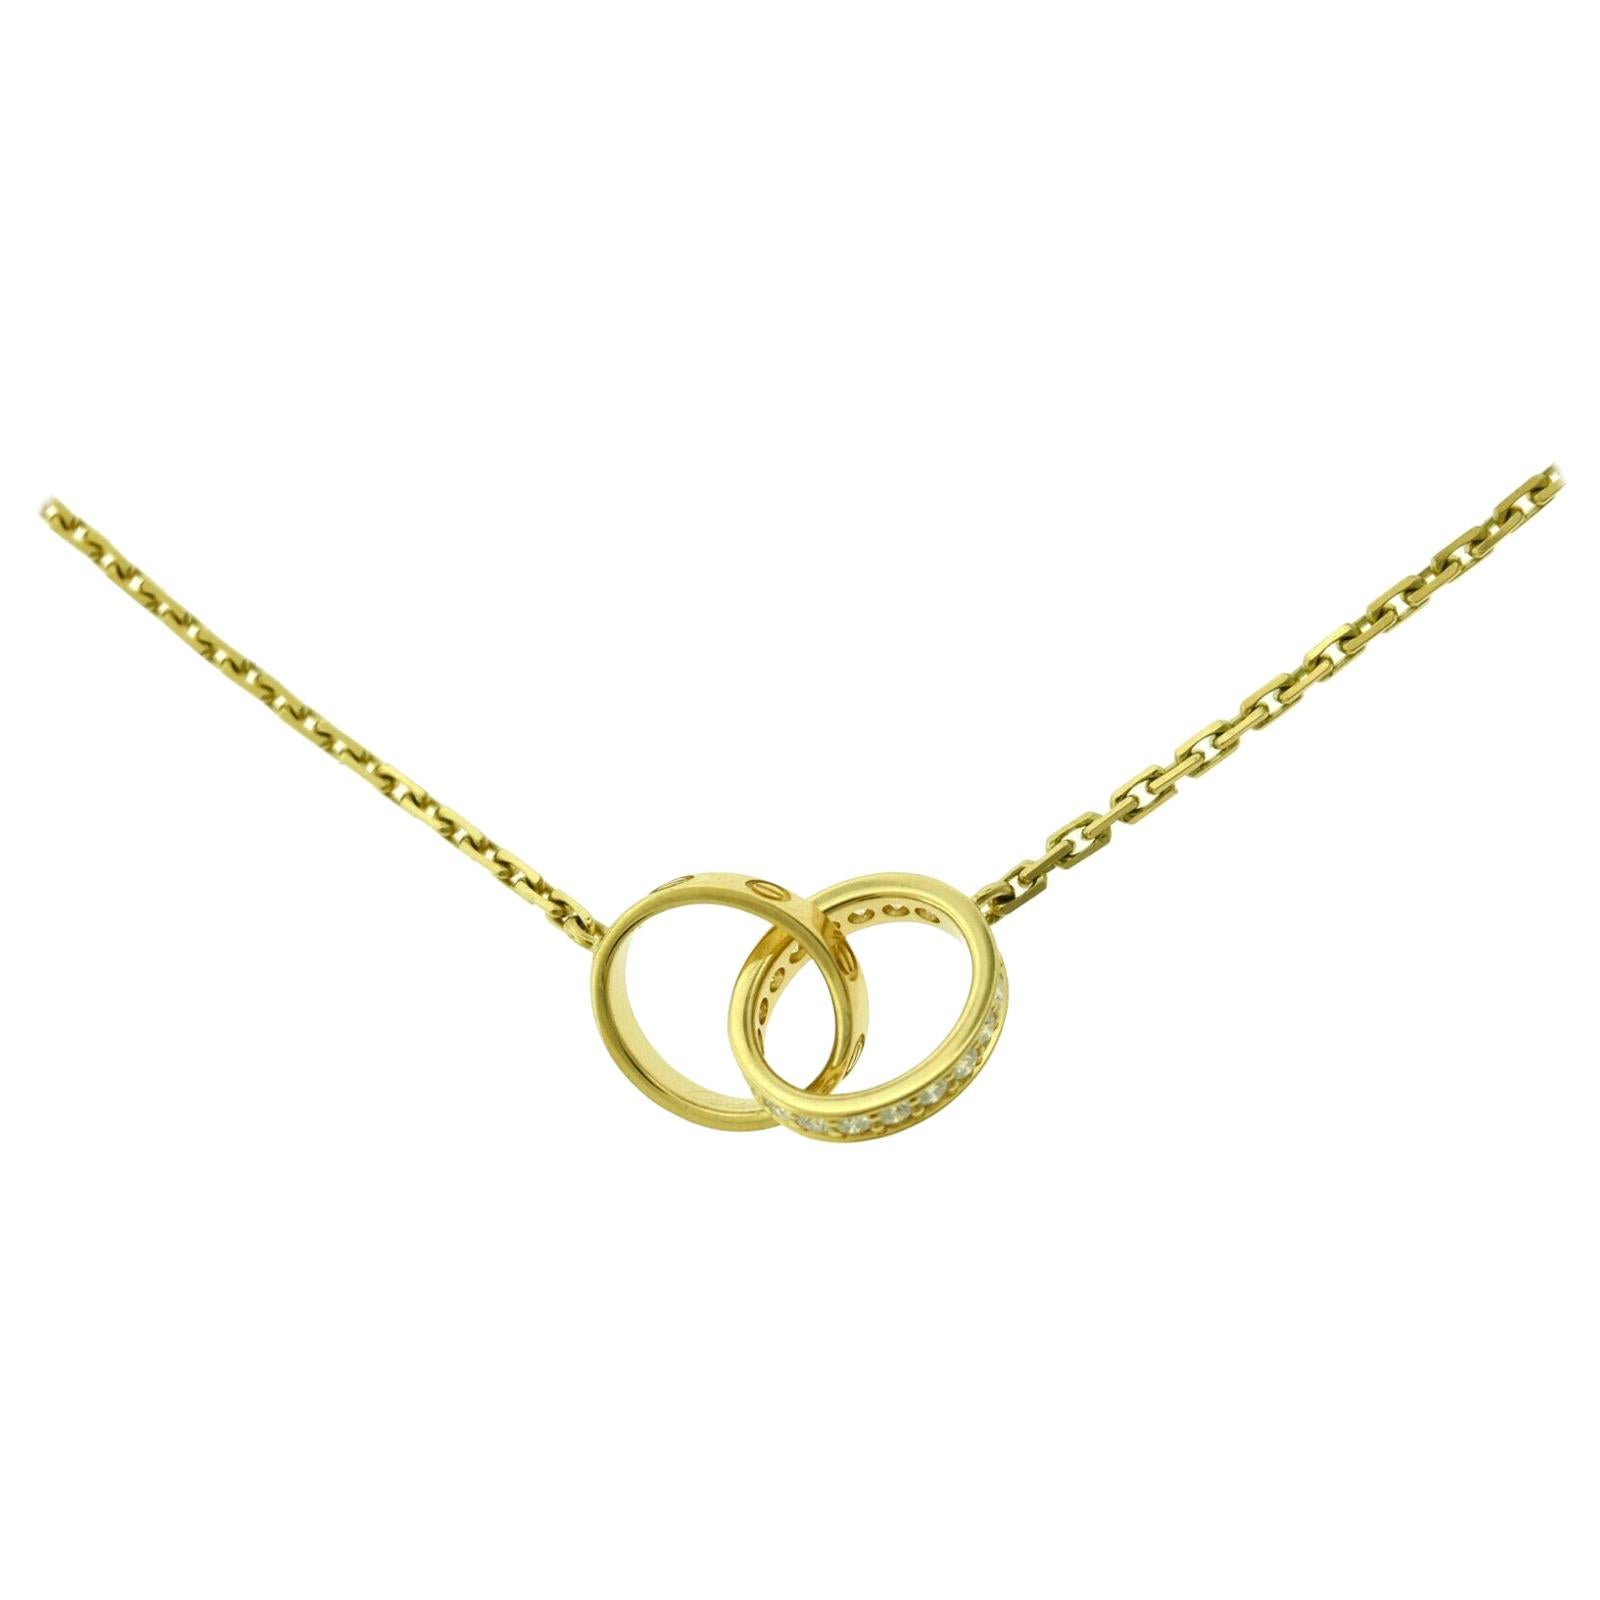 cartier necklace two rings